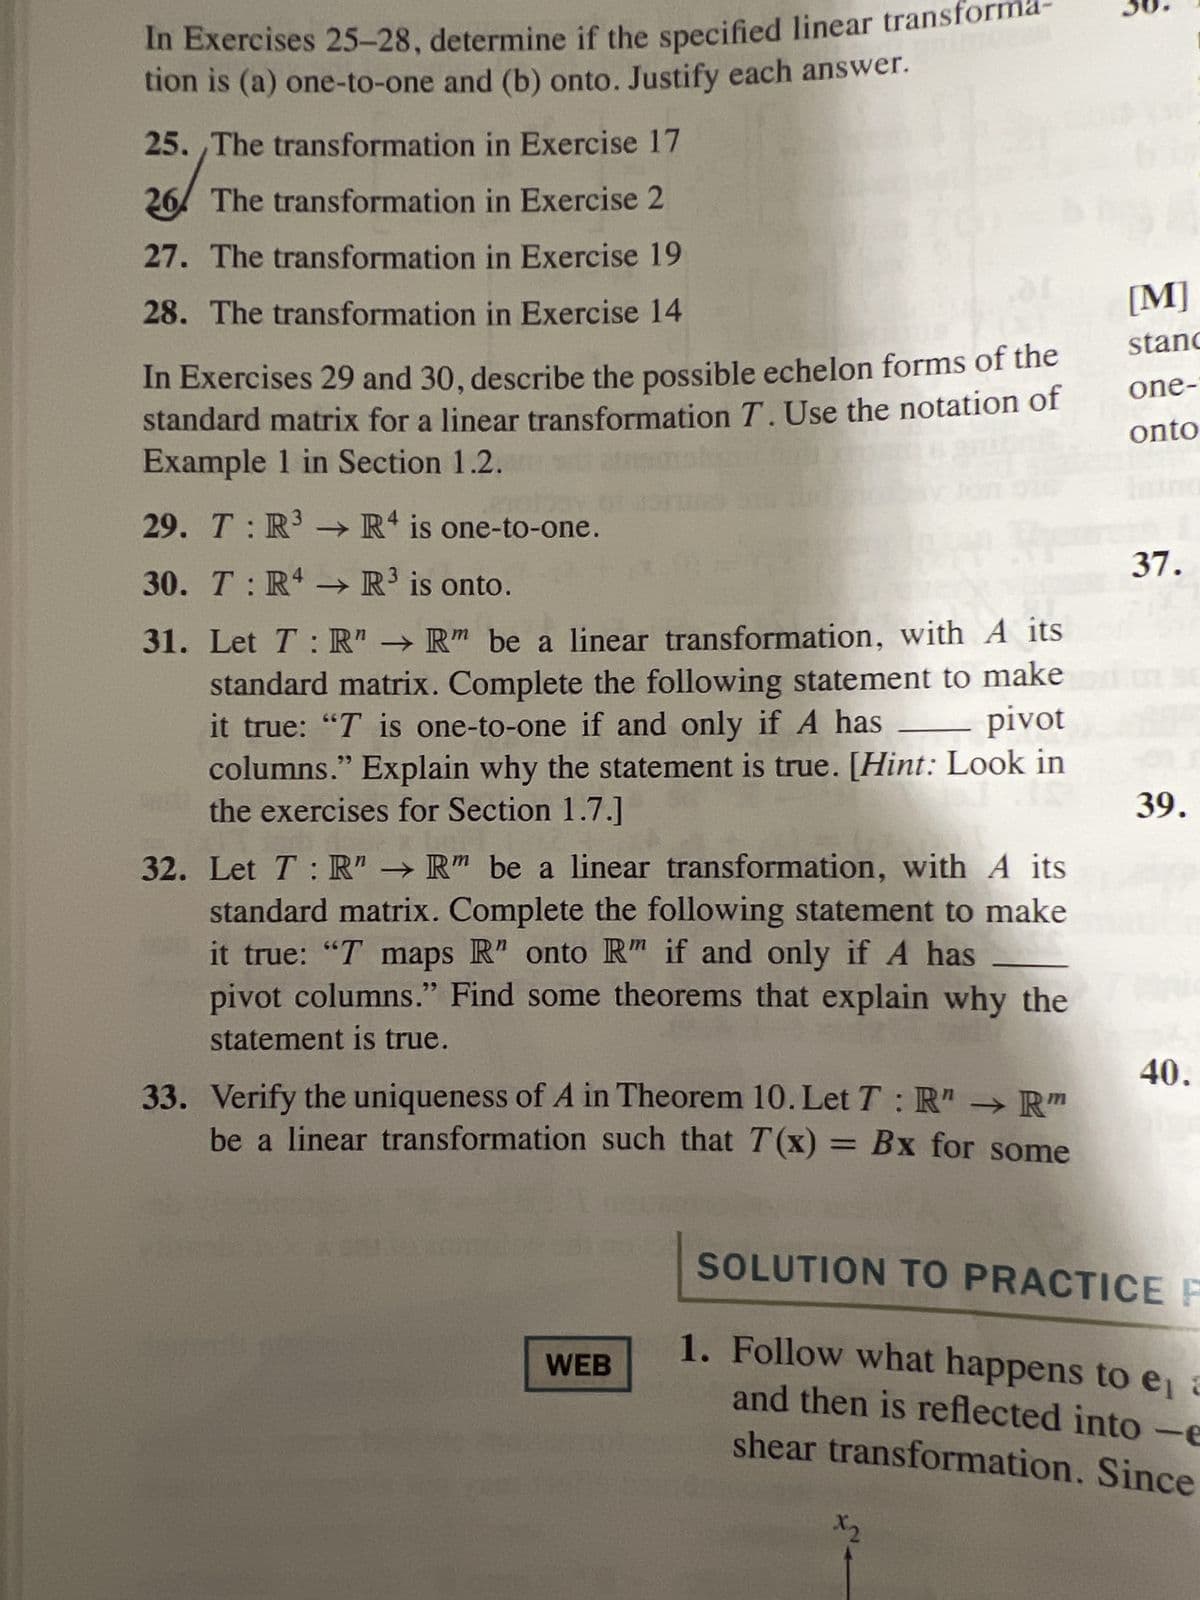 In Exercises 25-28, determine if the specified linear transfor
tion is (a) one-to-one and (b) onto. Justify each answer.
25. The transformation in Exercise 17
26 The transformation in Exercise 2
27. The transformation in Exercise 19
28. The transformation in Exercise 14
01
In Exercises 29 and 30, describe the possible echelon forms of the
standard matrix for a linear transformation T. Use the notation of
Example 1 in Section 1.2. ats
TANGA
olisy
29. T:R³ → R4 is one-to-one.
30. T:R4 → R³ is onto.
31. Let T: R" → Rm be a linear transformation, with A its
standard matrix. Complete the following statement to make
it true: "T is one-to-one if and only if A has
columns." Explain why the statement is true. [Hint: Look in
the exercises for Section 1.7.
pivot
32. Let T: R" → R" be a linear transformation, with A its
standard matrix. Complete the following statement to make
it true: "T maps R" onto R" if and only if A has
pivot columns." Find some theorems that explain why the
statement is true.
33. Verify the uniqueness of A in Theorem 10. Let T: R" → Rm
be a linear transformation such that T(x) = Bx for some
WEB
o
x2
[M]
stand
one-
onto
37.
39.
40.
SOLUTION TO PRACTICE F
1. Follow what happens to e, a
and then is reflected into -e
shear transformation. Since